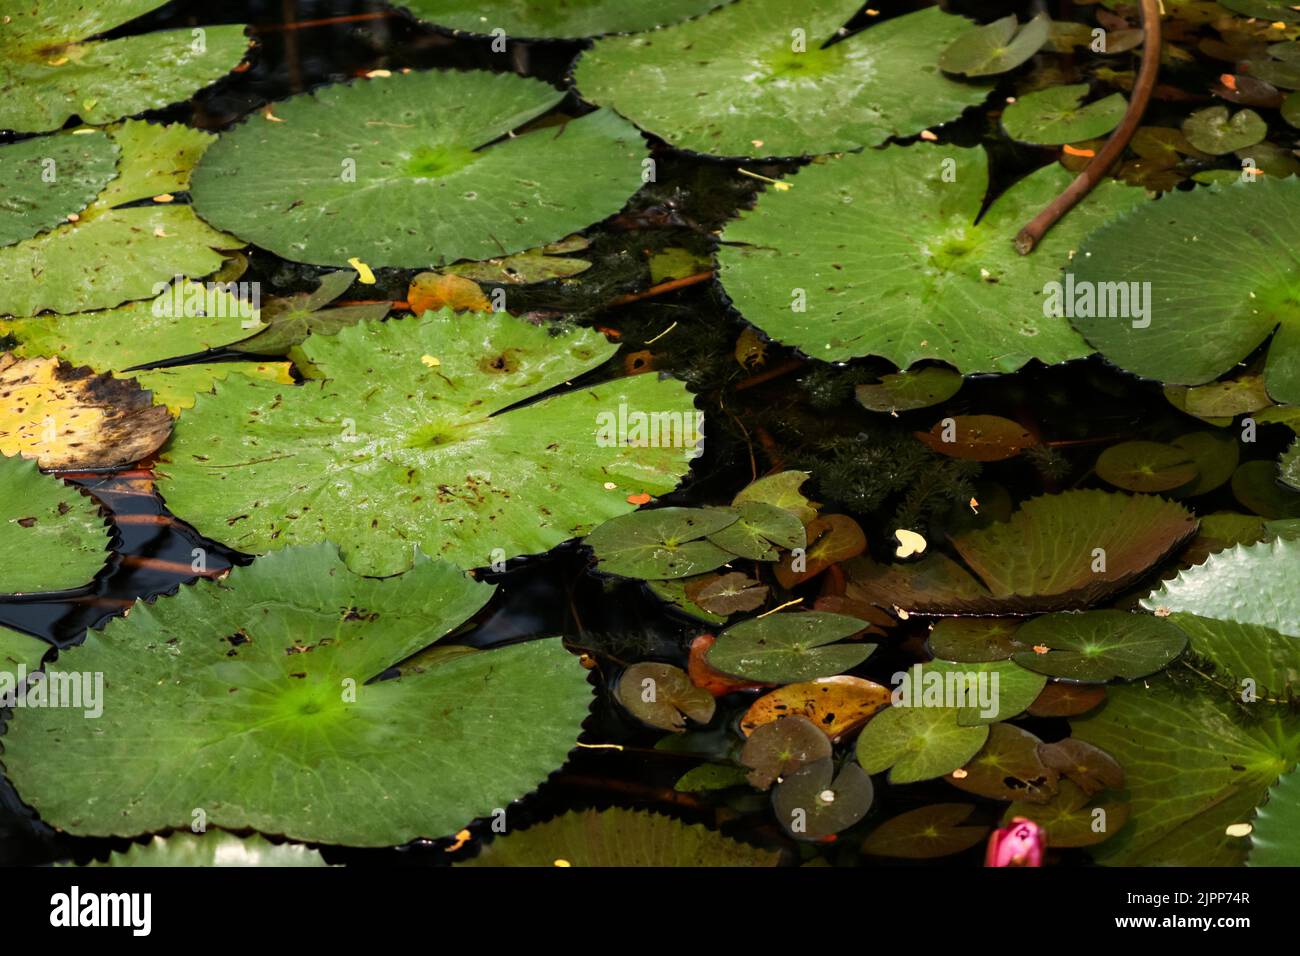 A pond with green floating lotus leaves Stock Photo